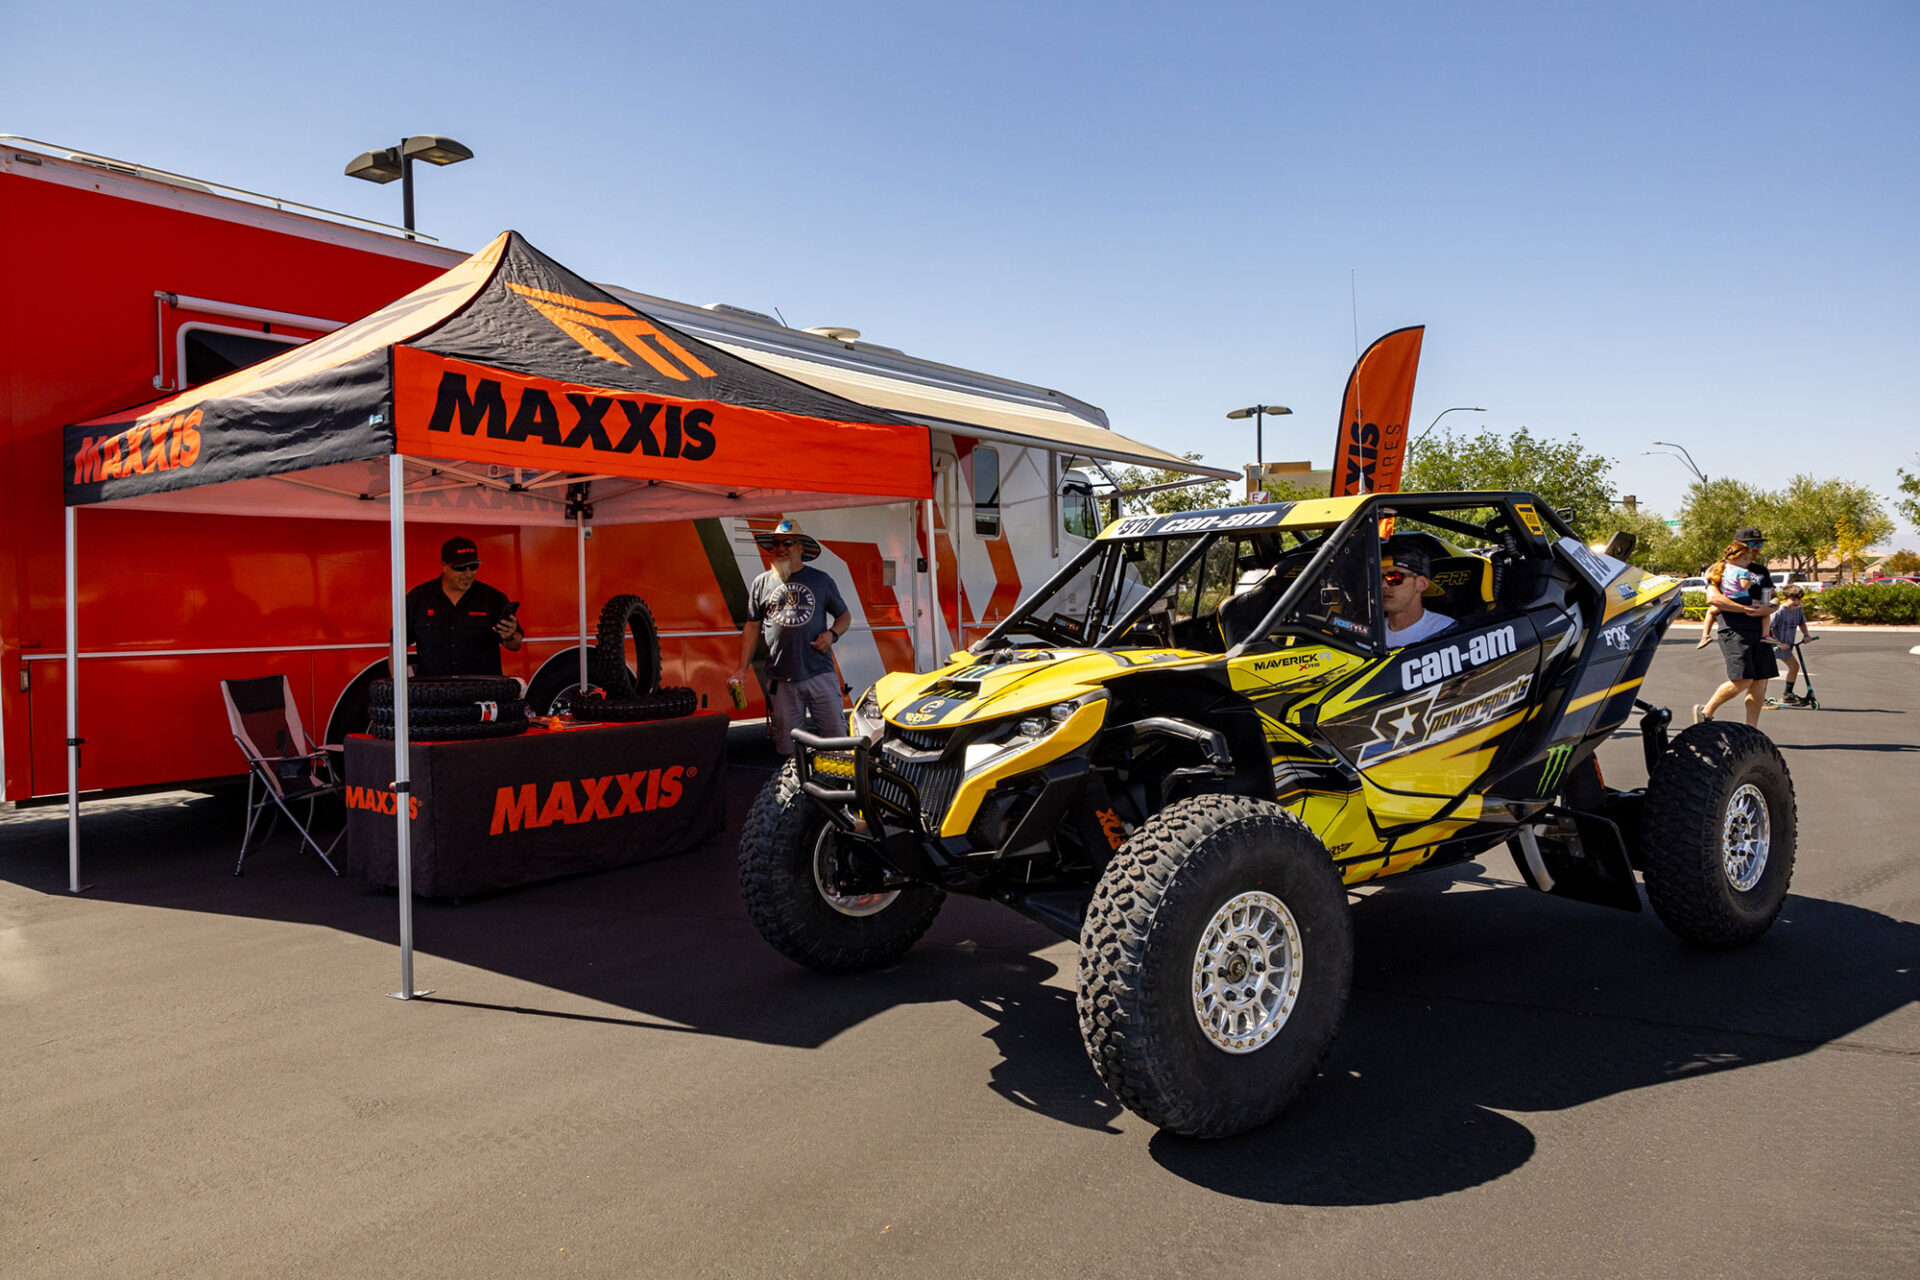 Dustin “Battle Axe” Jones CAN-AM UTV vehicle outfitted with Maxxis RAZR XT tires